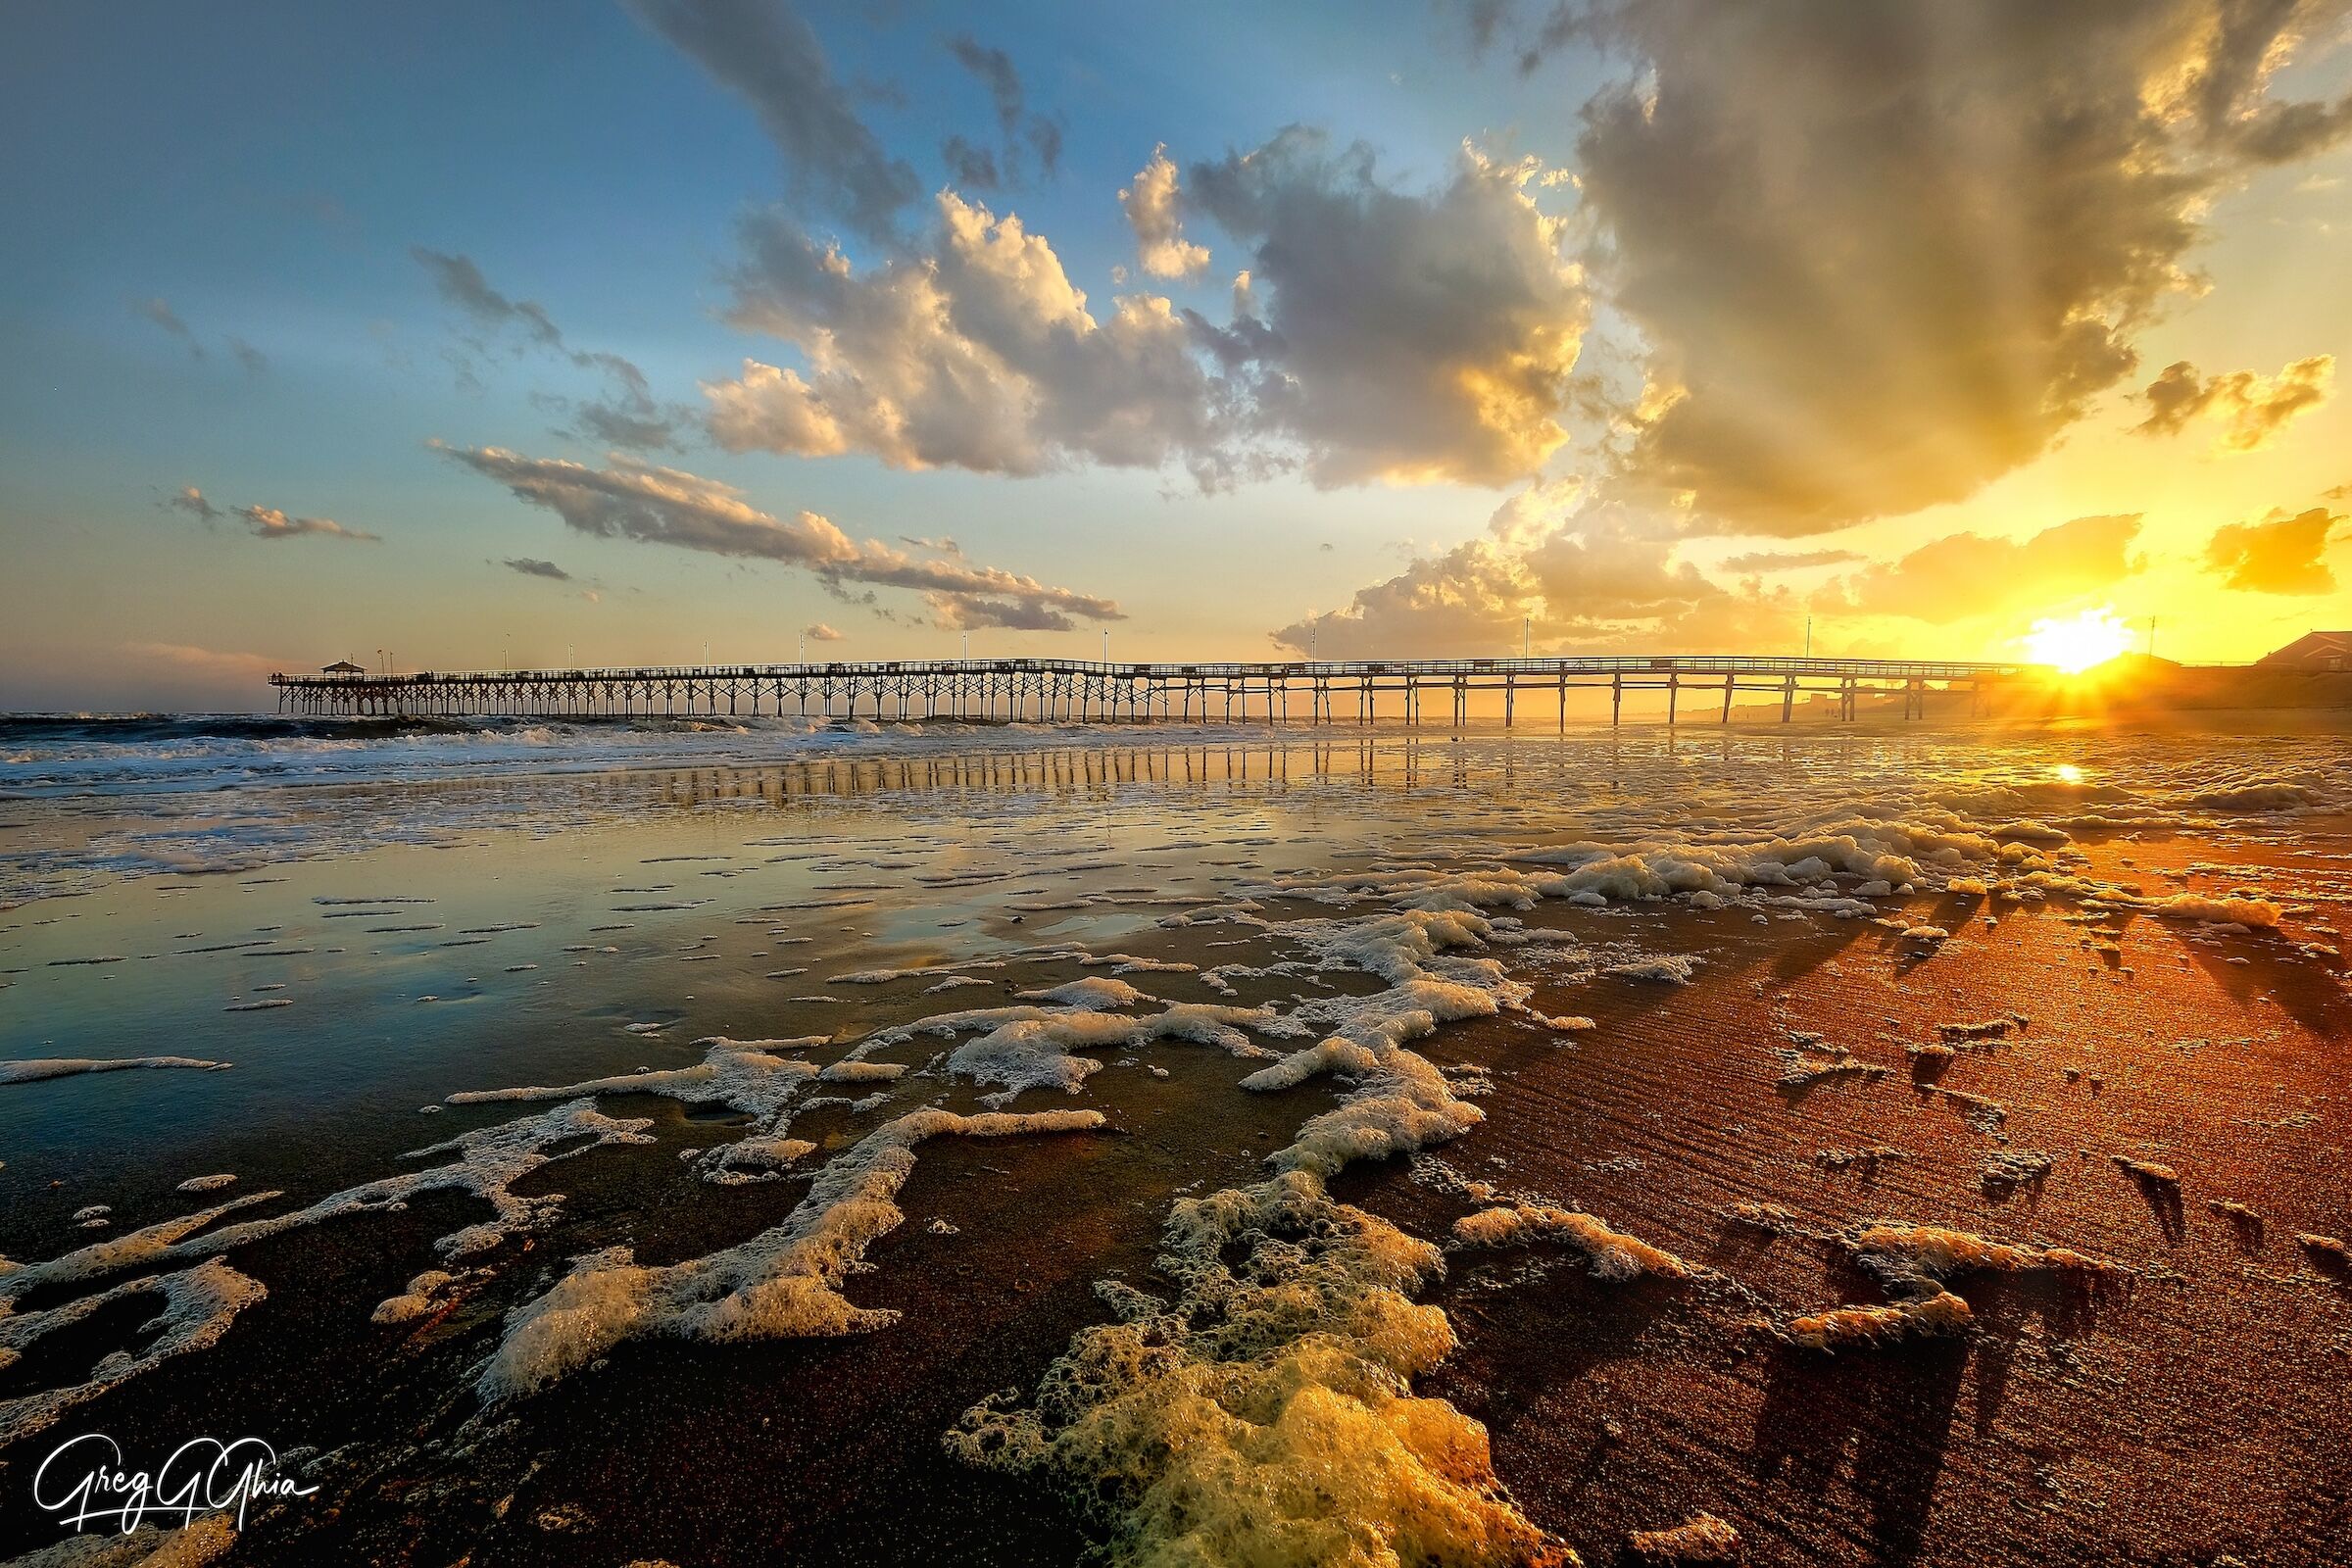 Pier is seen on the beach at sunset with a strikingly golden sky that casts a warm light on the sand and water as the waves roll in.